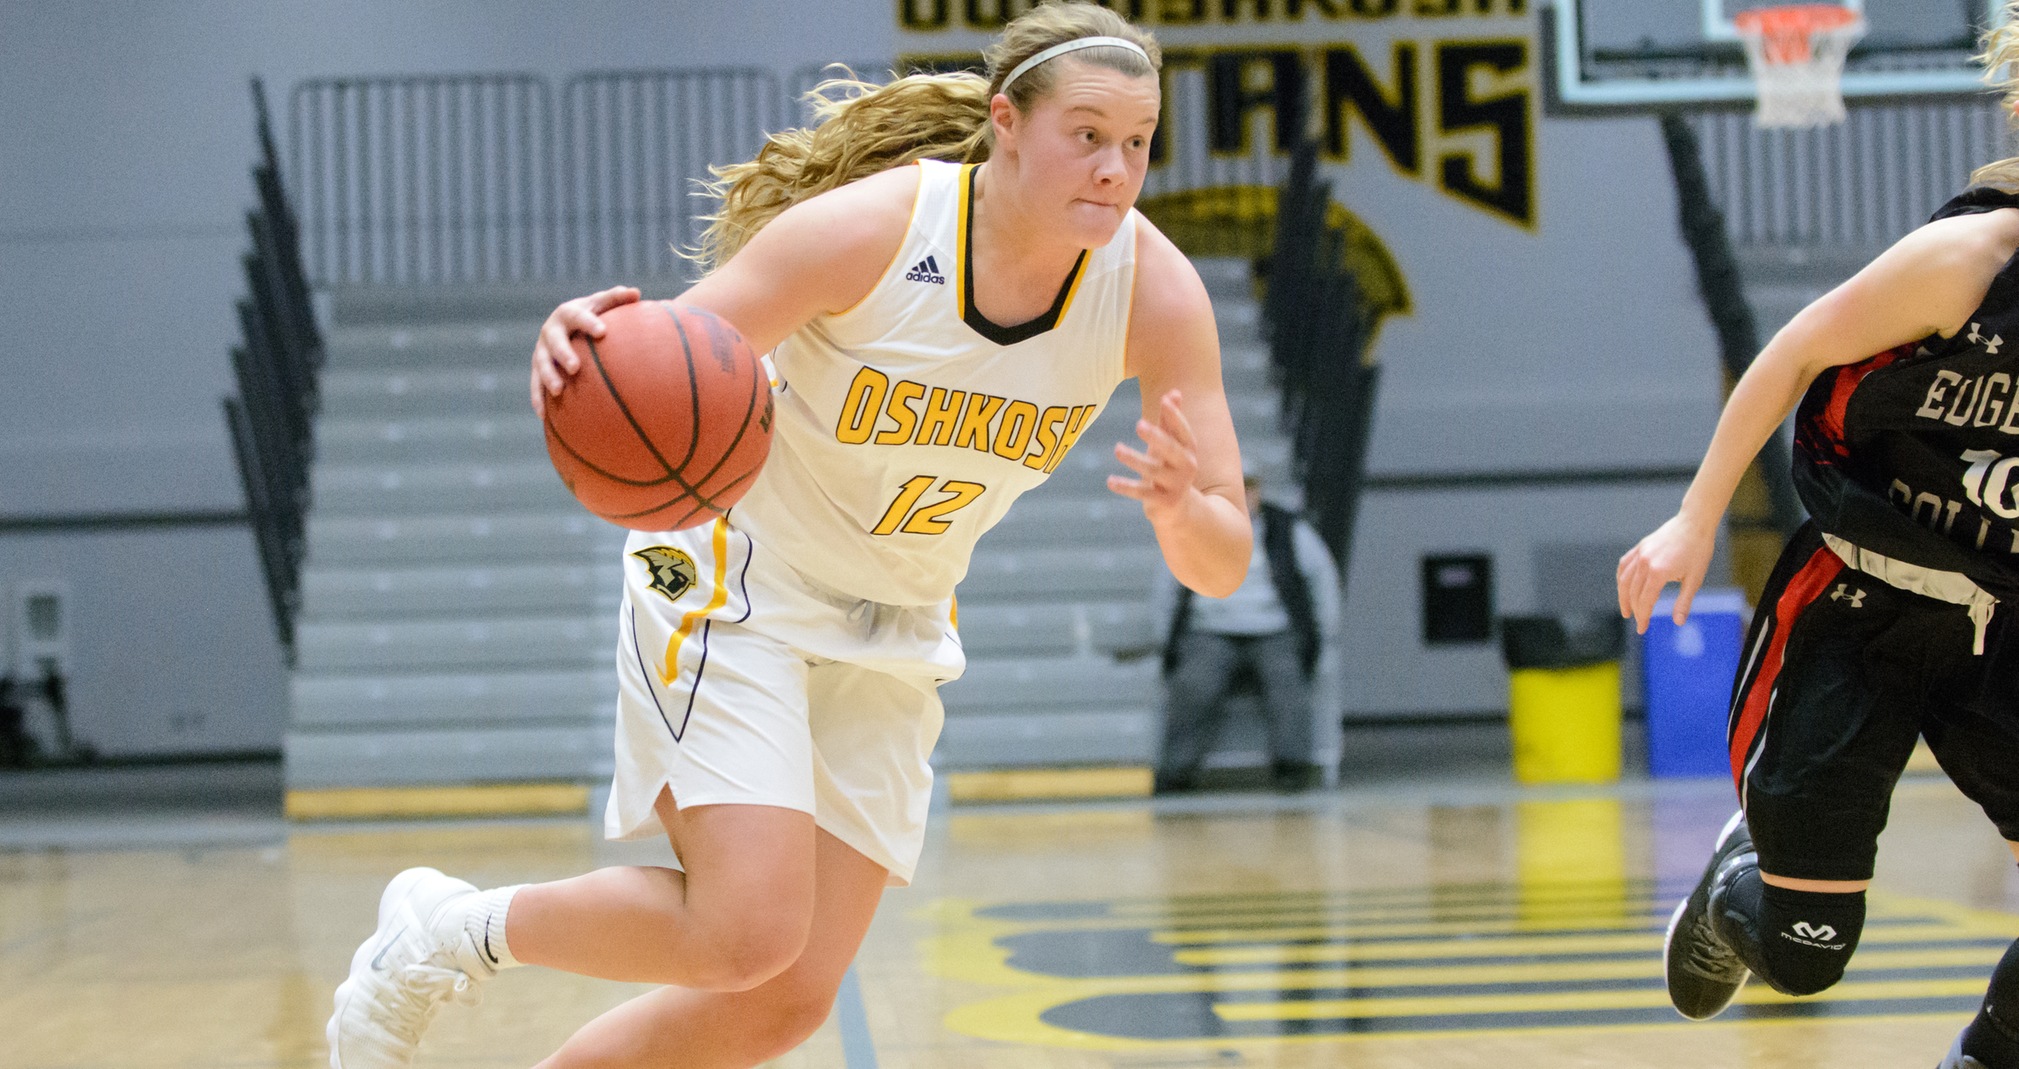 Leah Porath scored 20 points and collected eight rebounds against the Eagles.